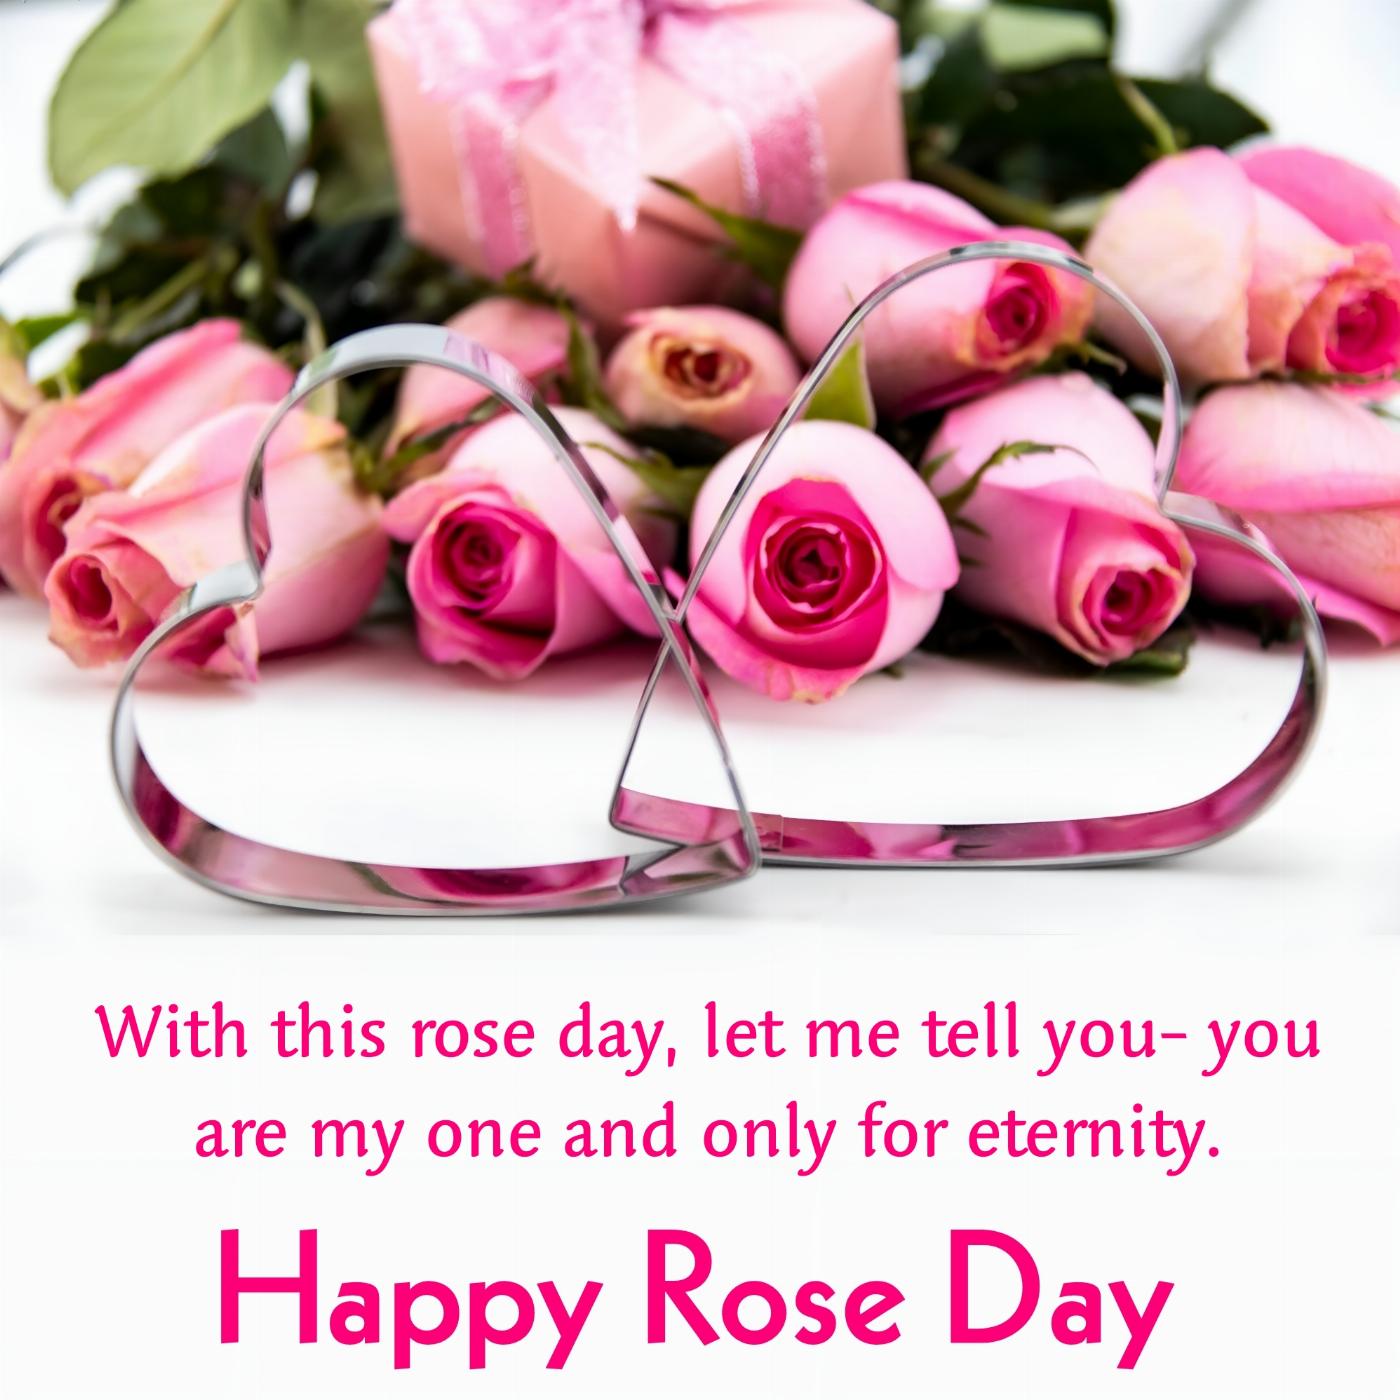 With this rose day let me tell you- you are my one and only